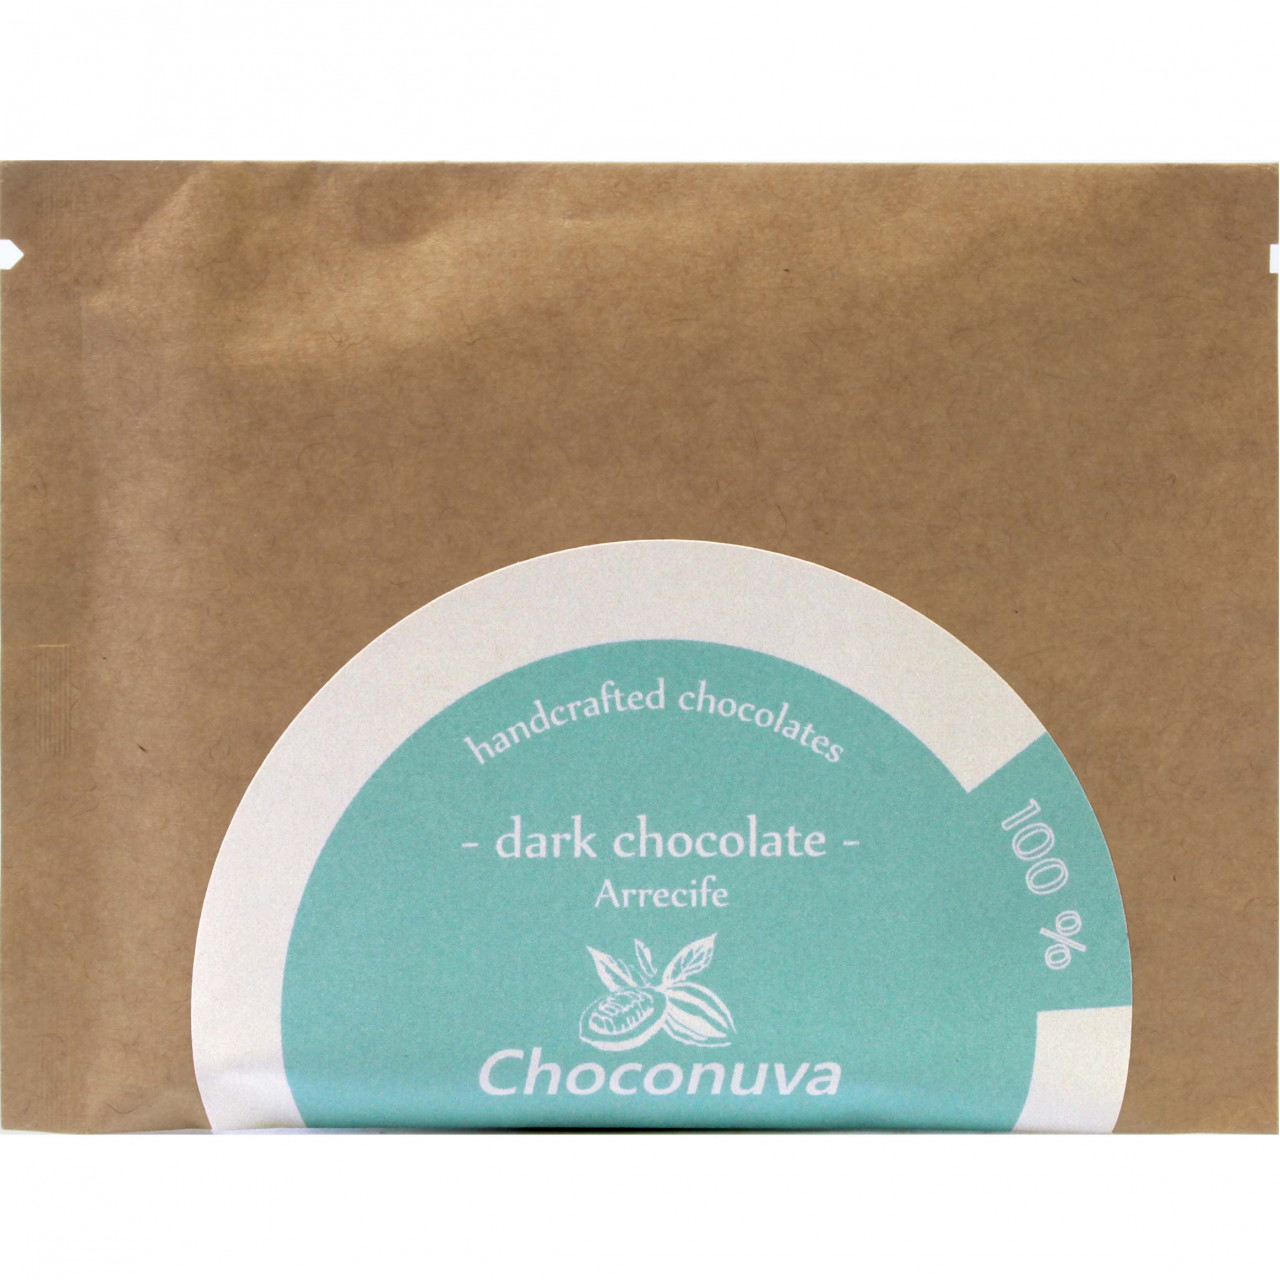 100% Cocoa Mass handcrafted - dark chocolate - Bar of Chocolate, low sugar, without added sugar, without granulated or cane sugar , Germany, german chocolate, plain pure chocolate without ingredients - Chocolats-De-Luxe